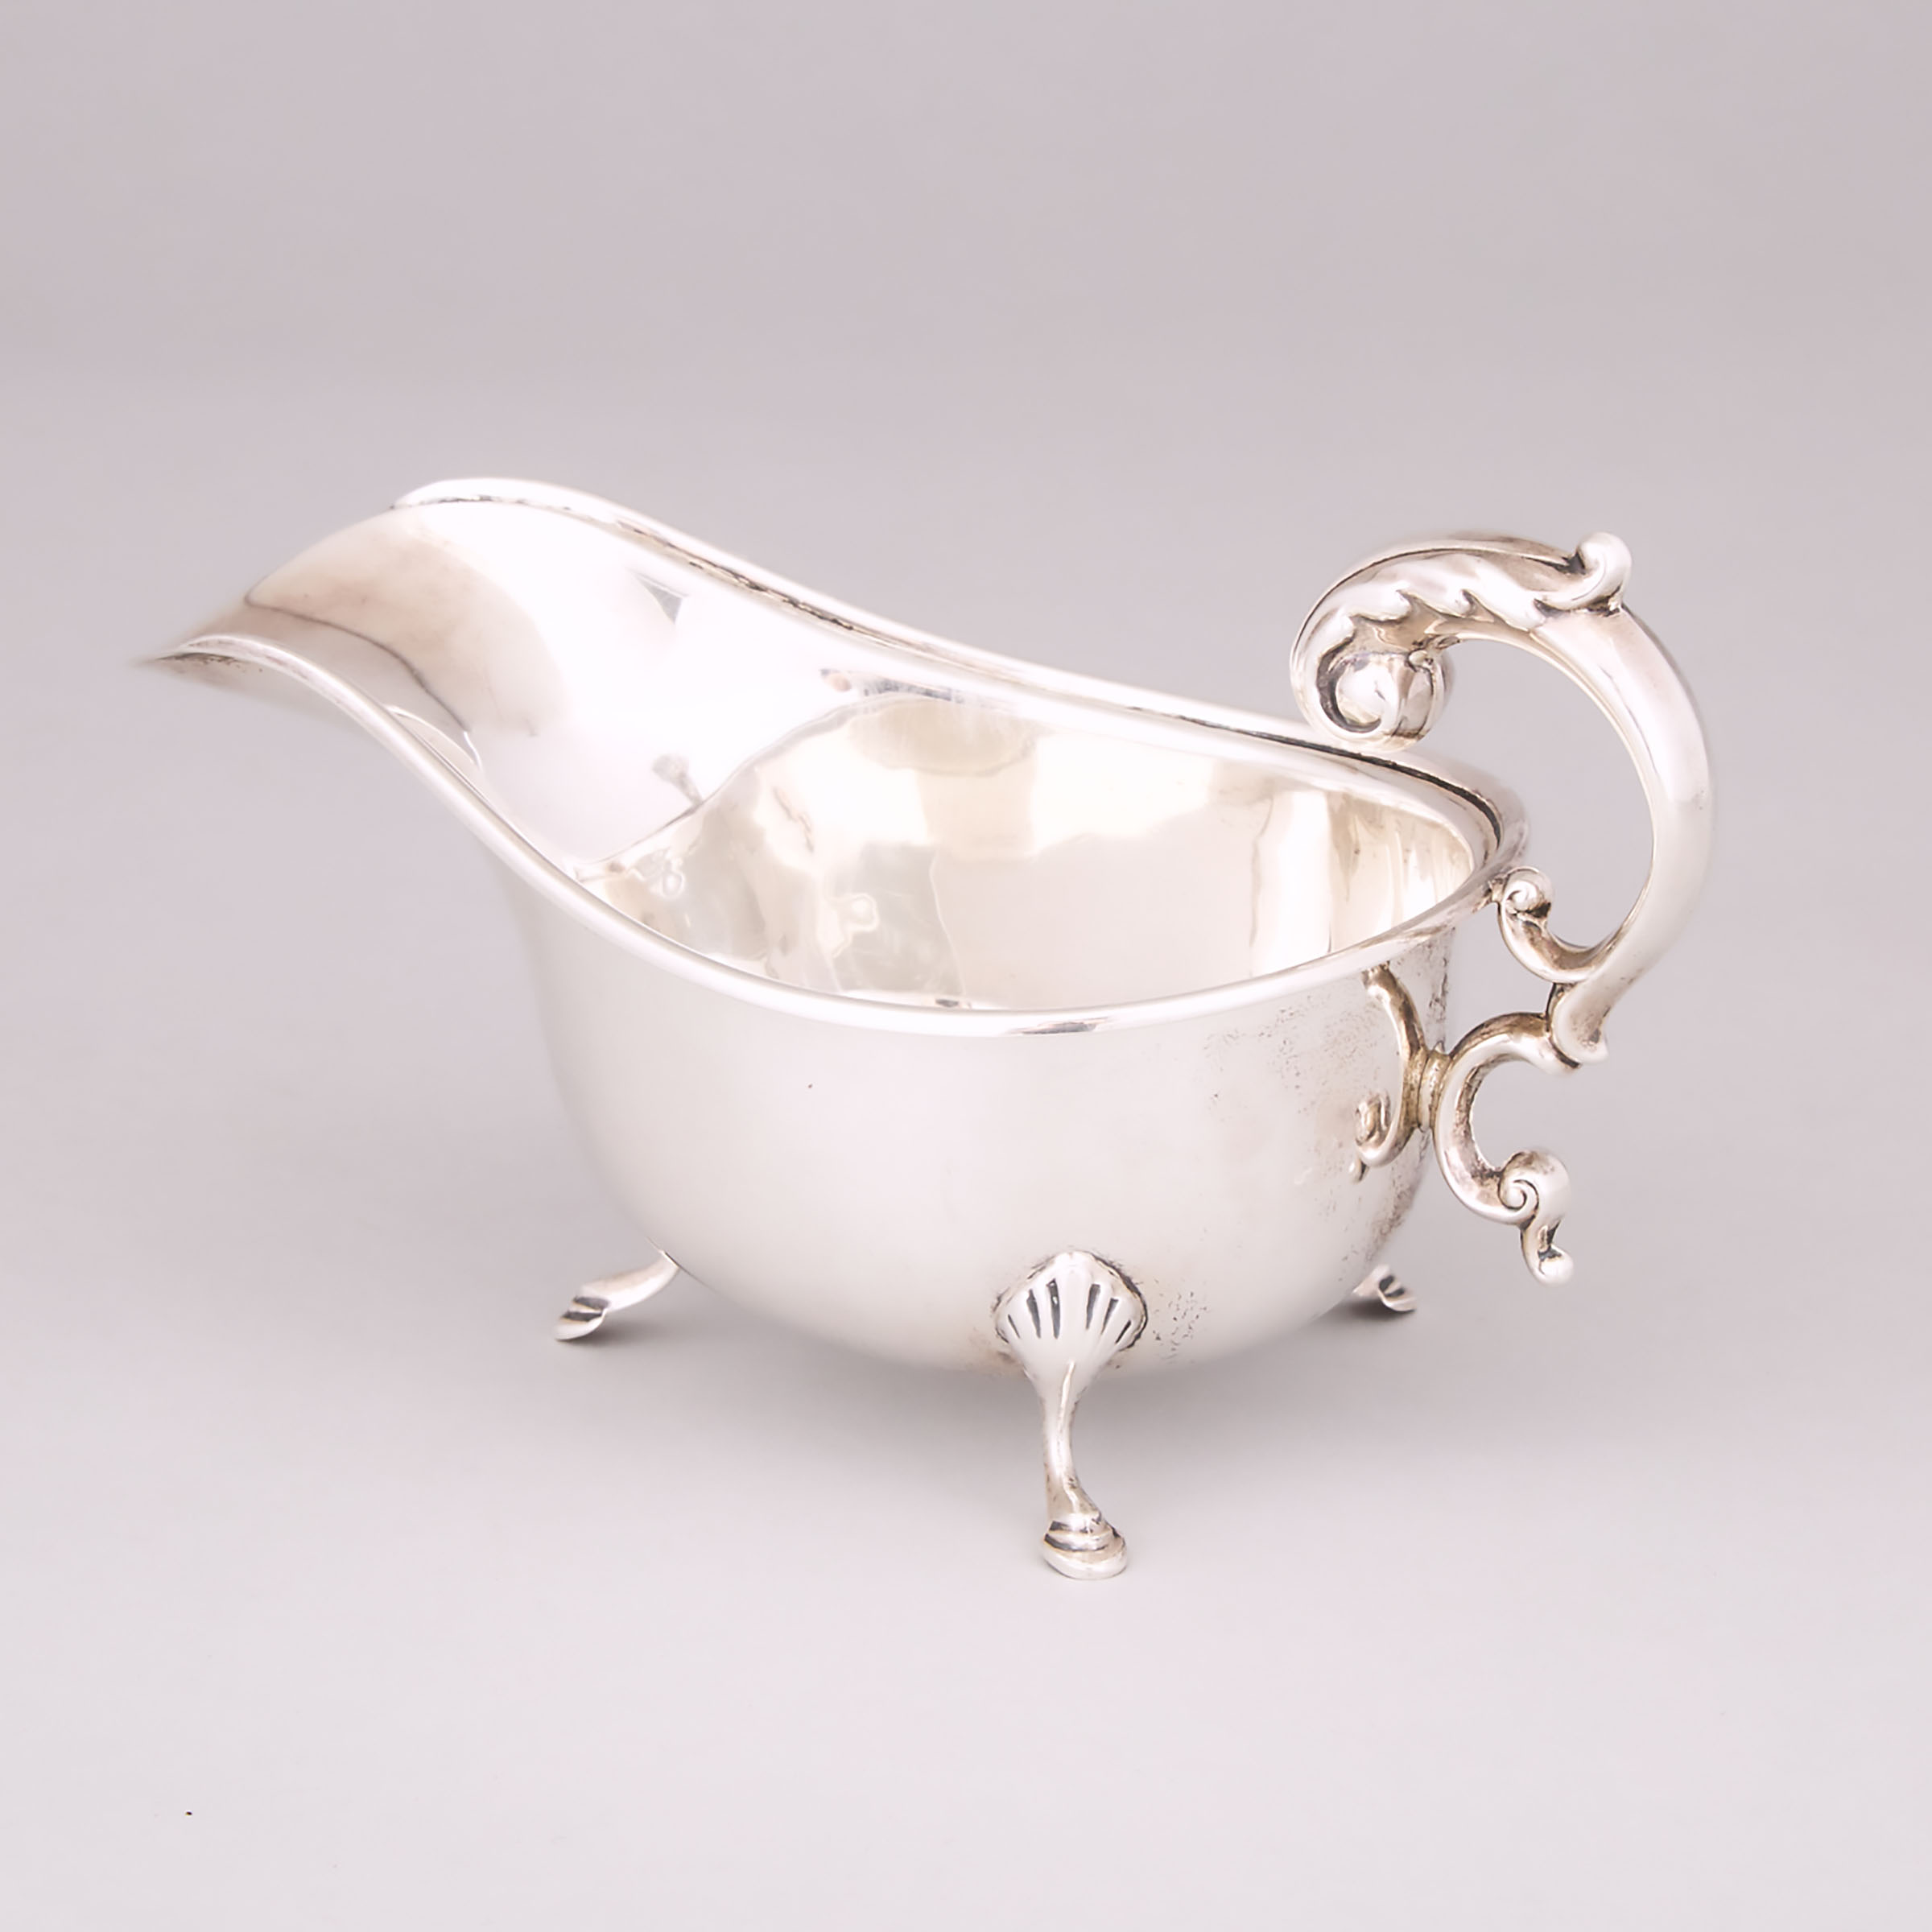 English Silver Sauce Boat, S. Blanckensee & Son, Chester, 1937